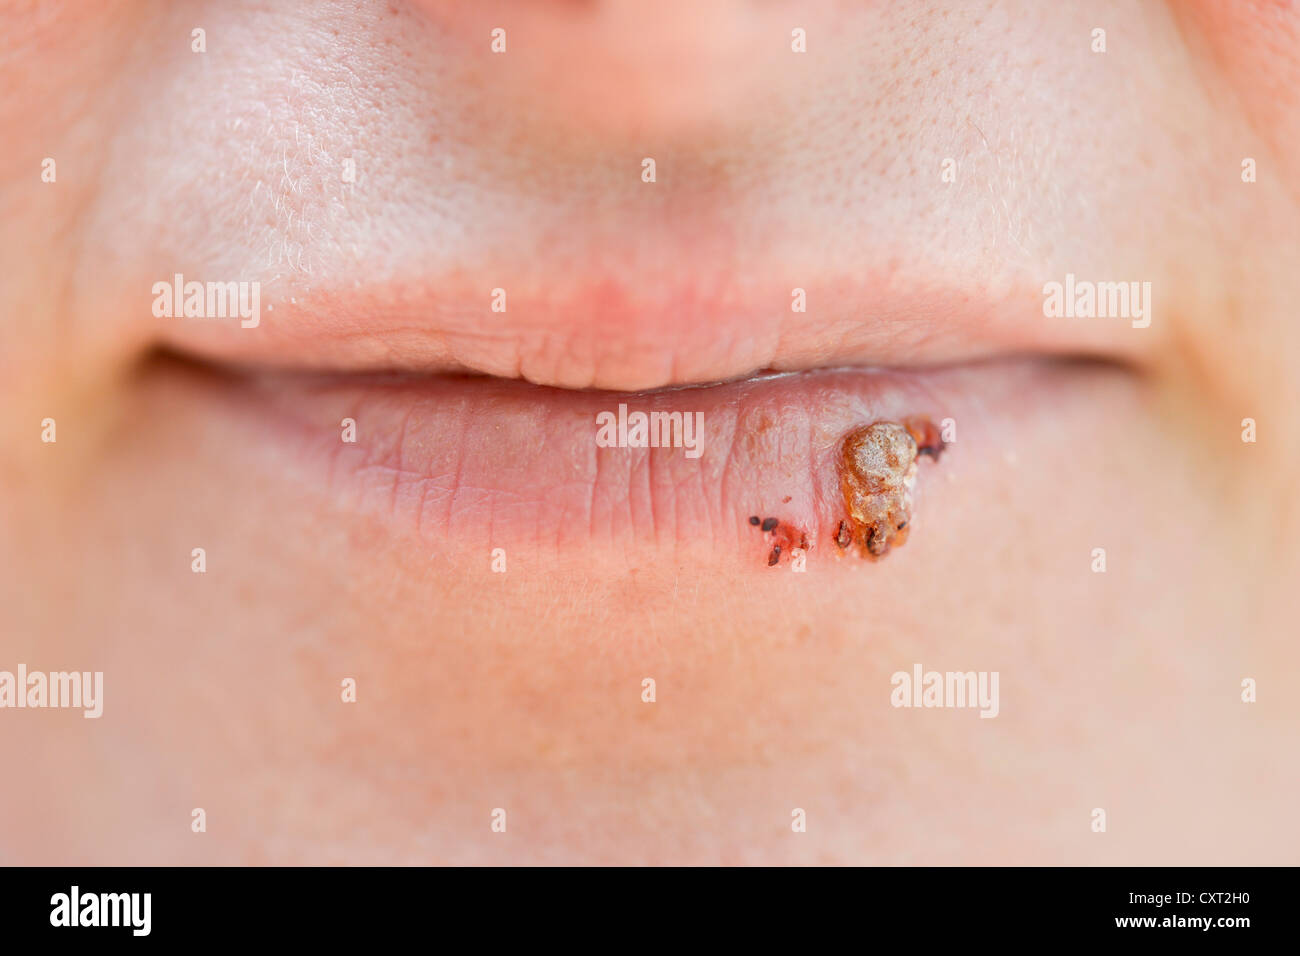 Woman with herpes simplex labialis on her lips Stock Photo